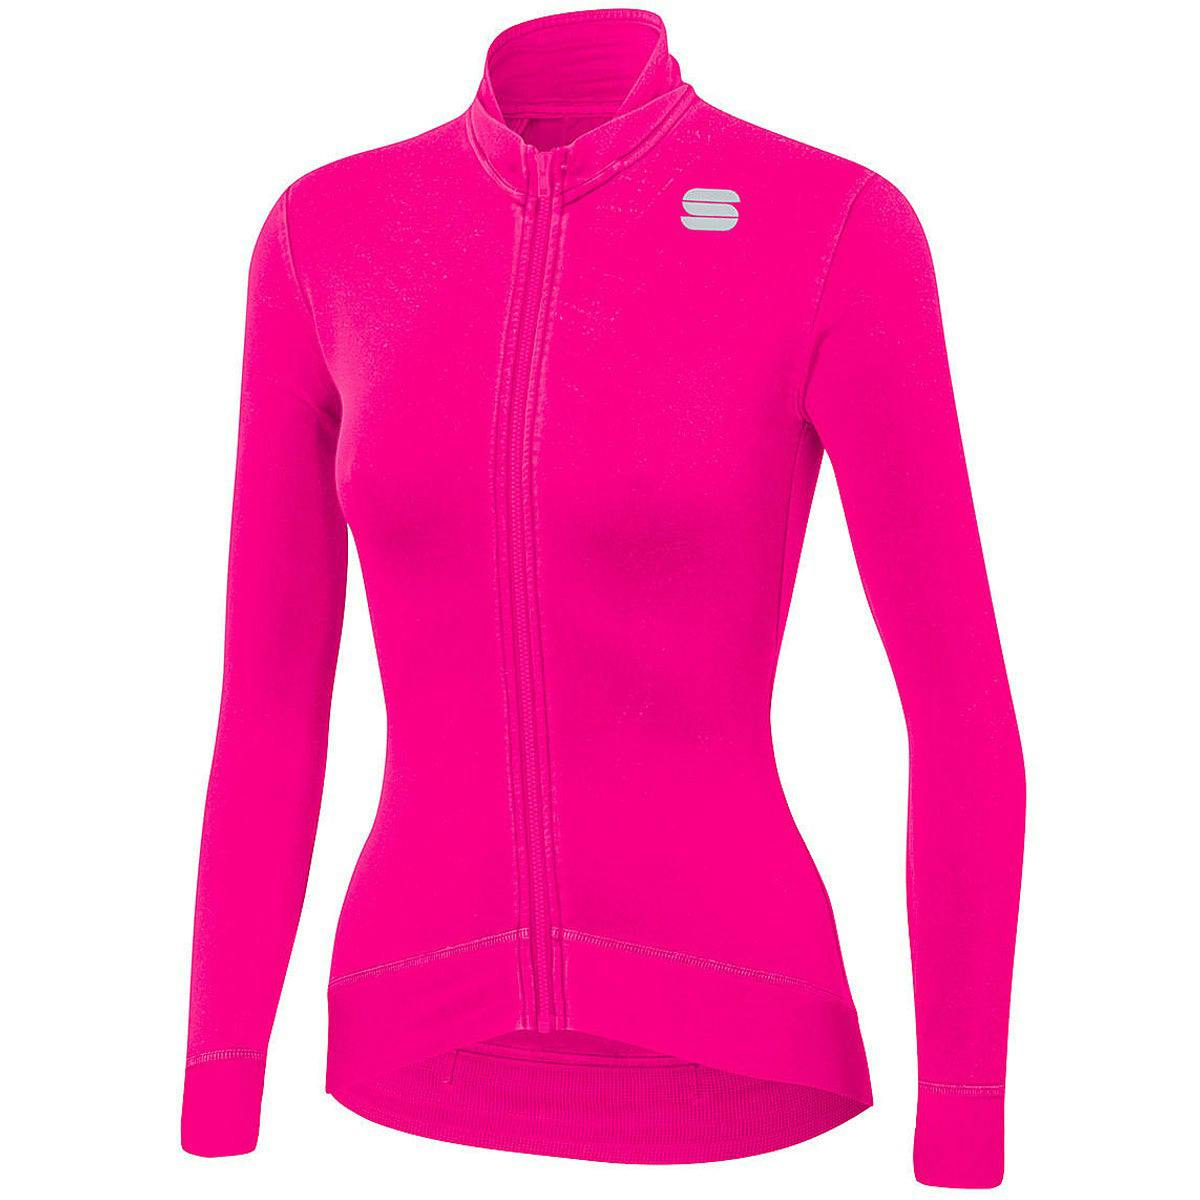 Sportful Monocrom Women's Thermal Cycling Jersey - Bubble Gum - Large